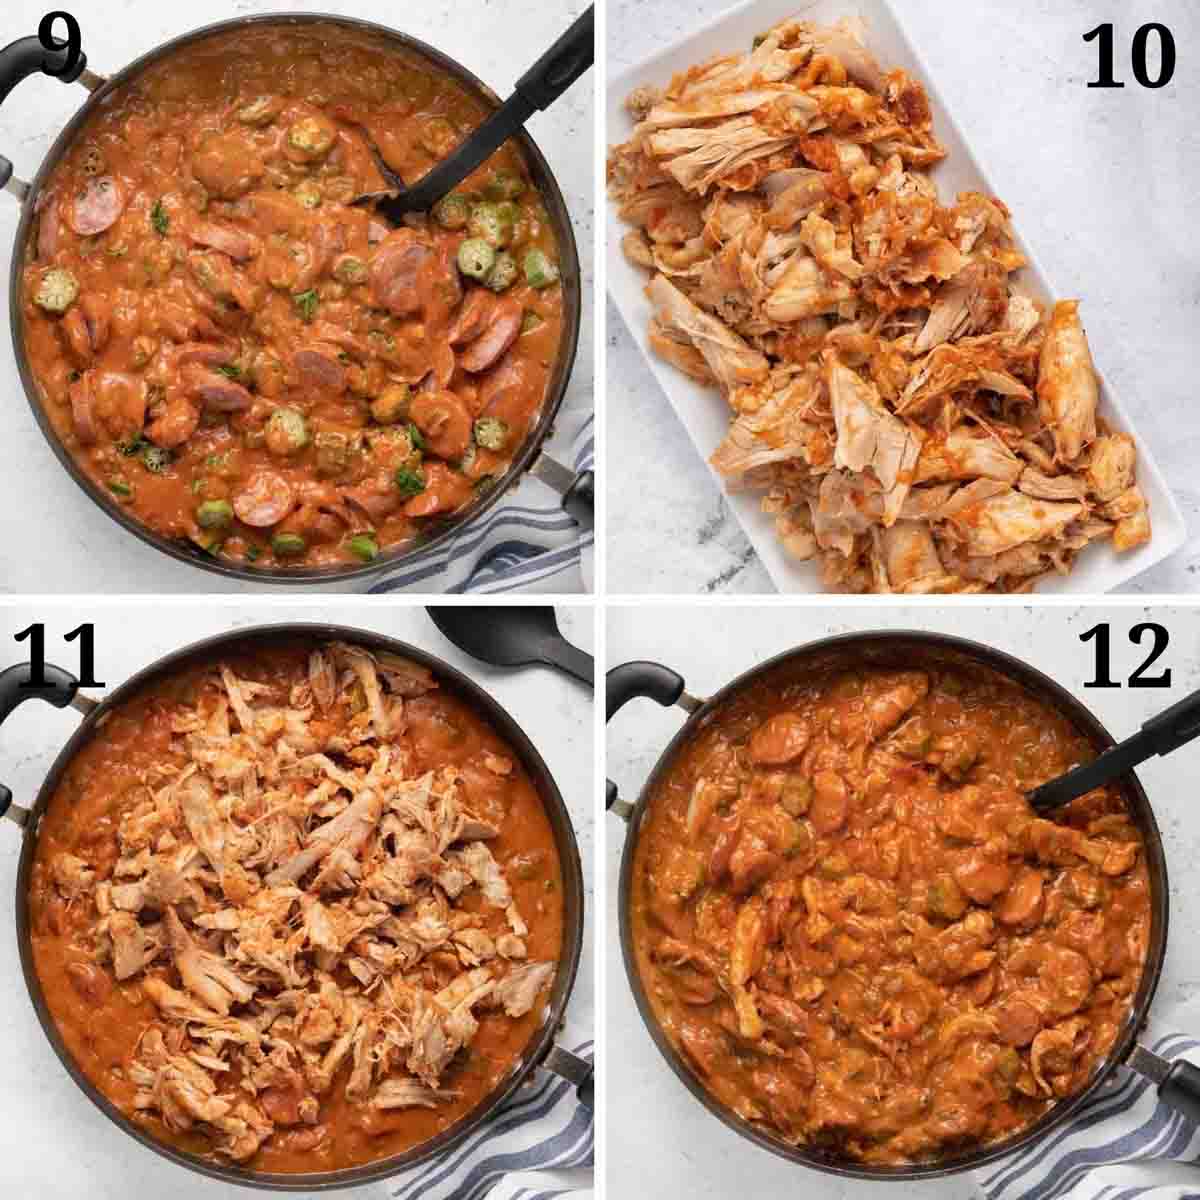 four images showing the final steps in making chicken gumbo